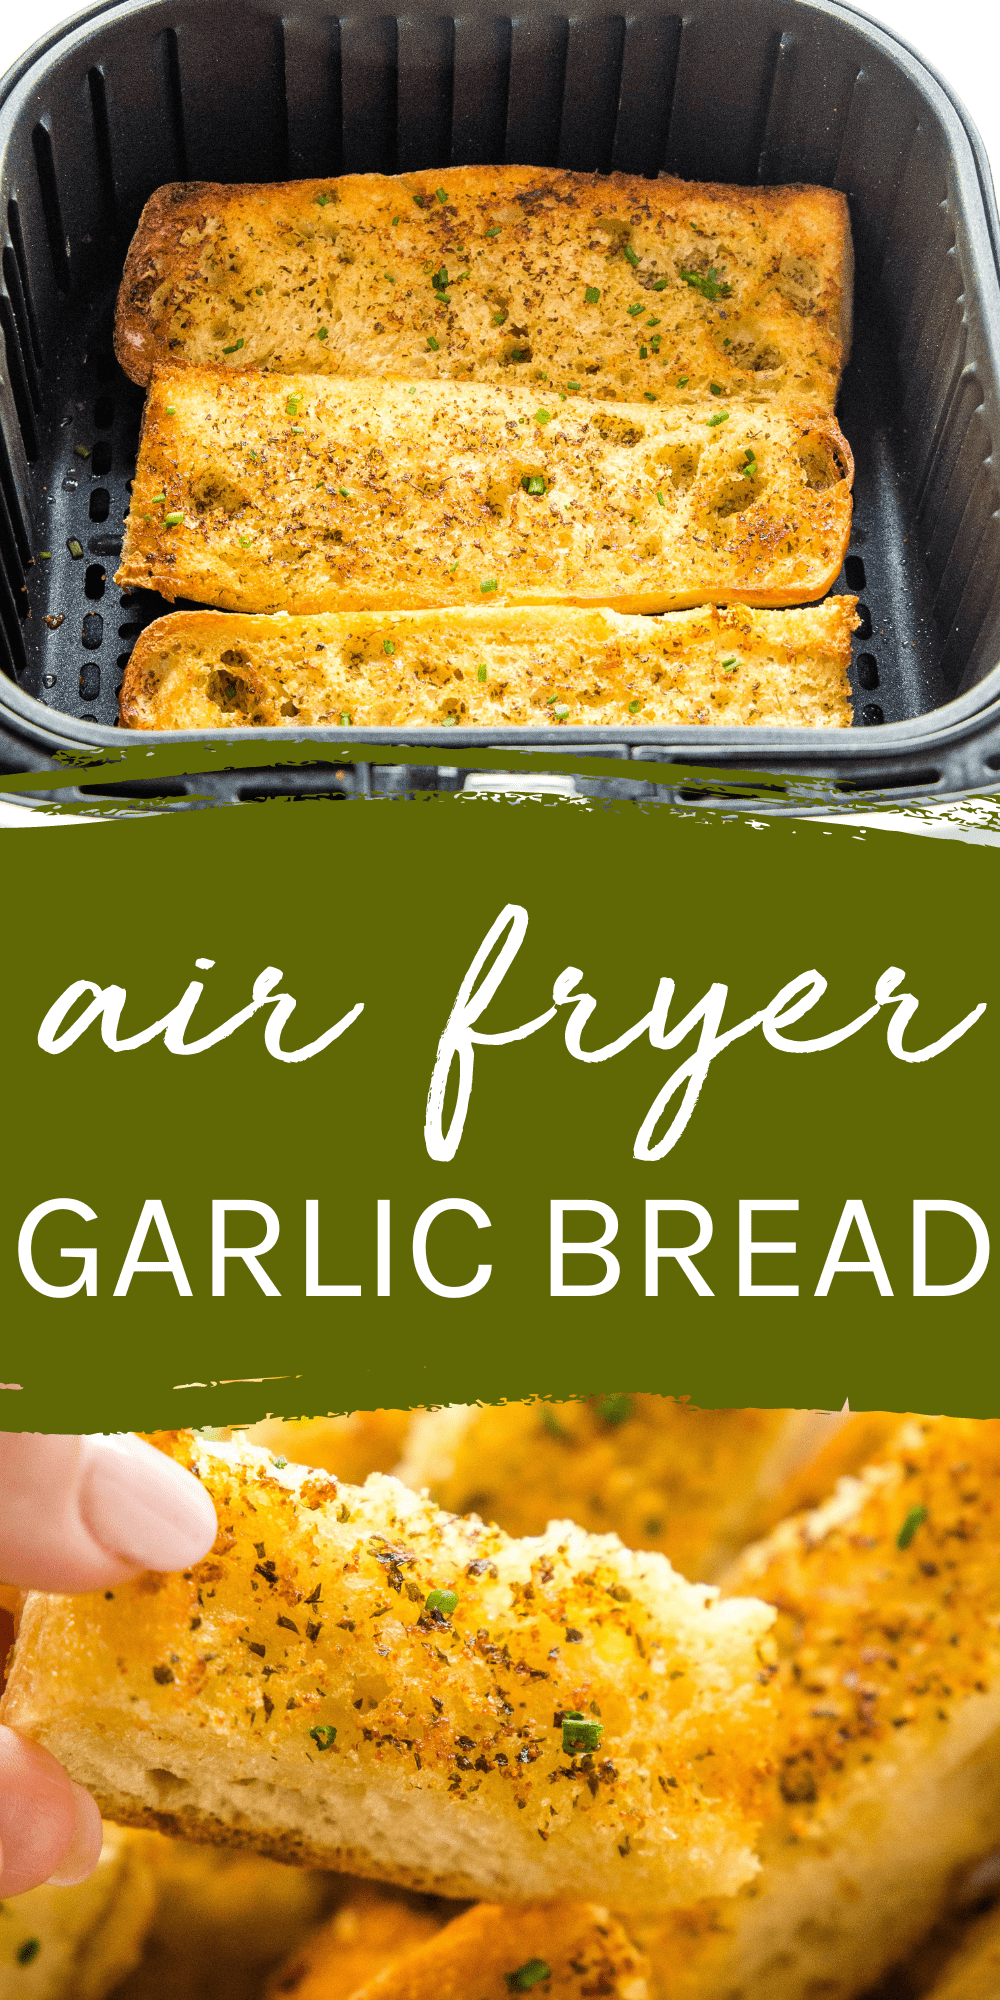 This Air Fryer Garlic Bread Recipe is the best easy garlic toast ready in under 10 minutes. Crispy restaurant-style garlic bread made with butter, garlic, and herbs. Recipe from thebusybaker.ca! #airfryergarlicbread #garlicbread #garlictoast #Italian #homemade #bread #baking #airfryerrecipe #familymeal via @busybakerblog